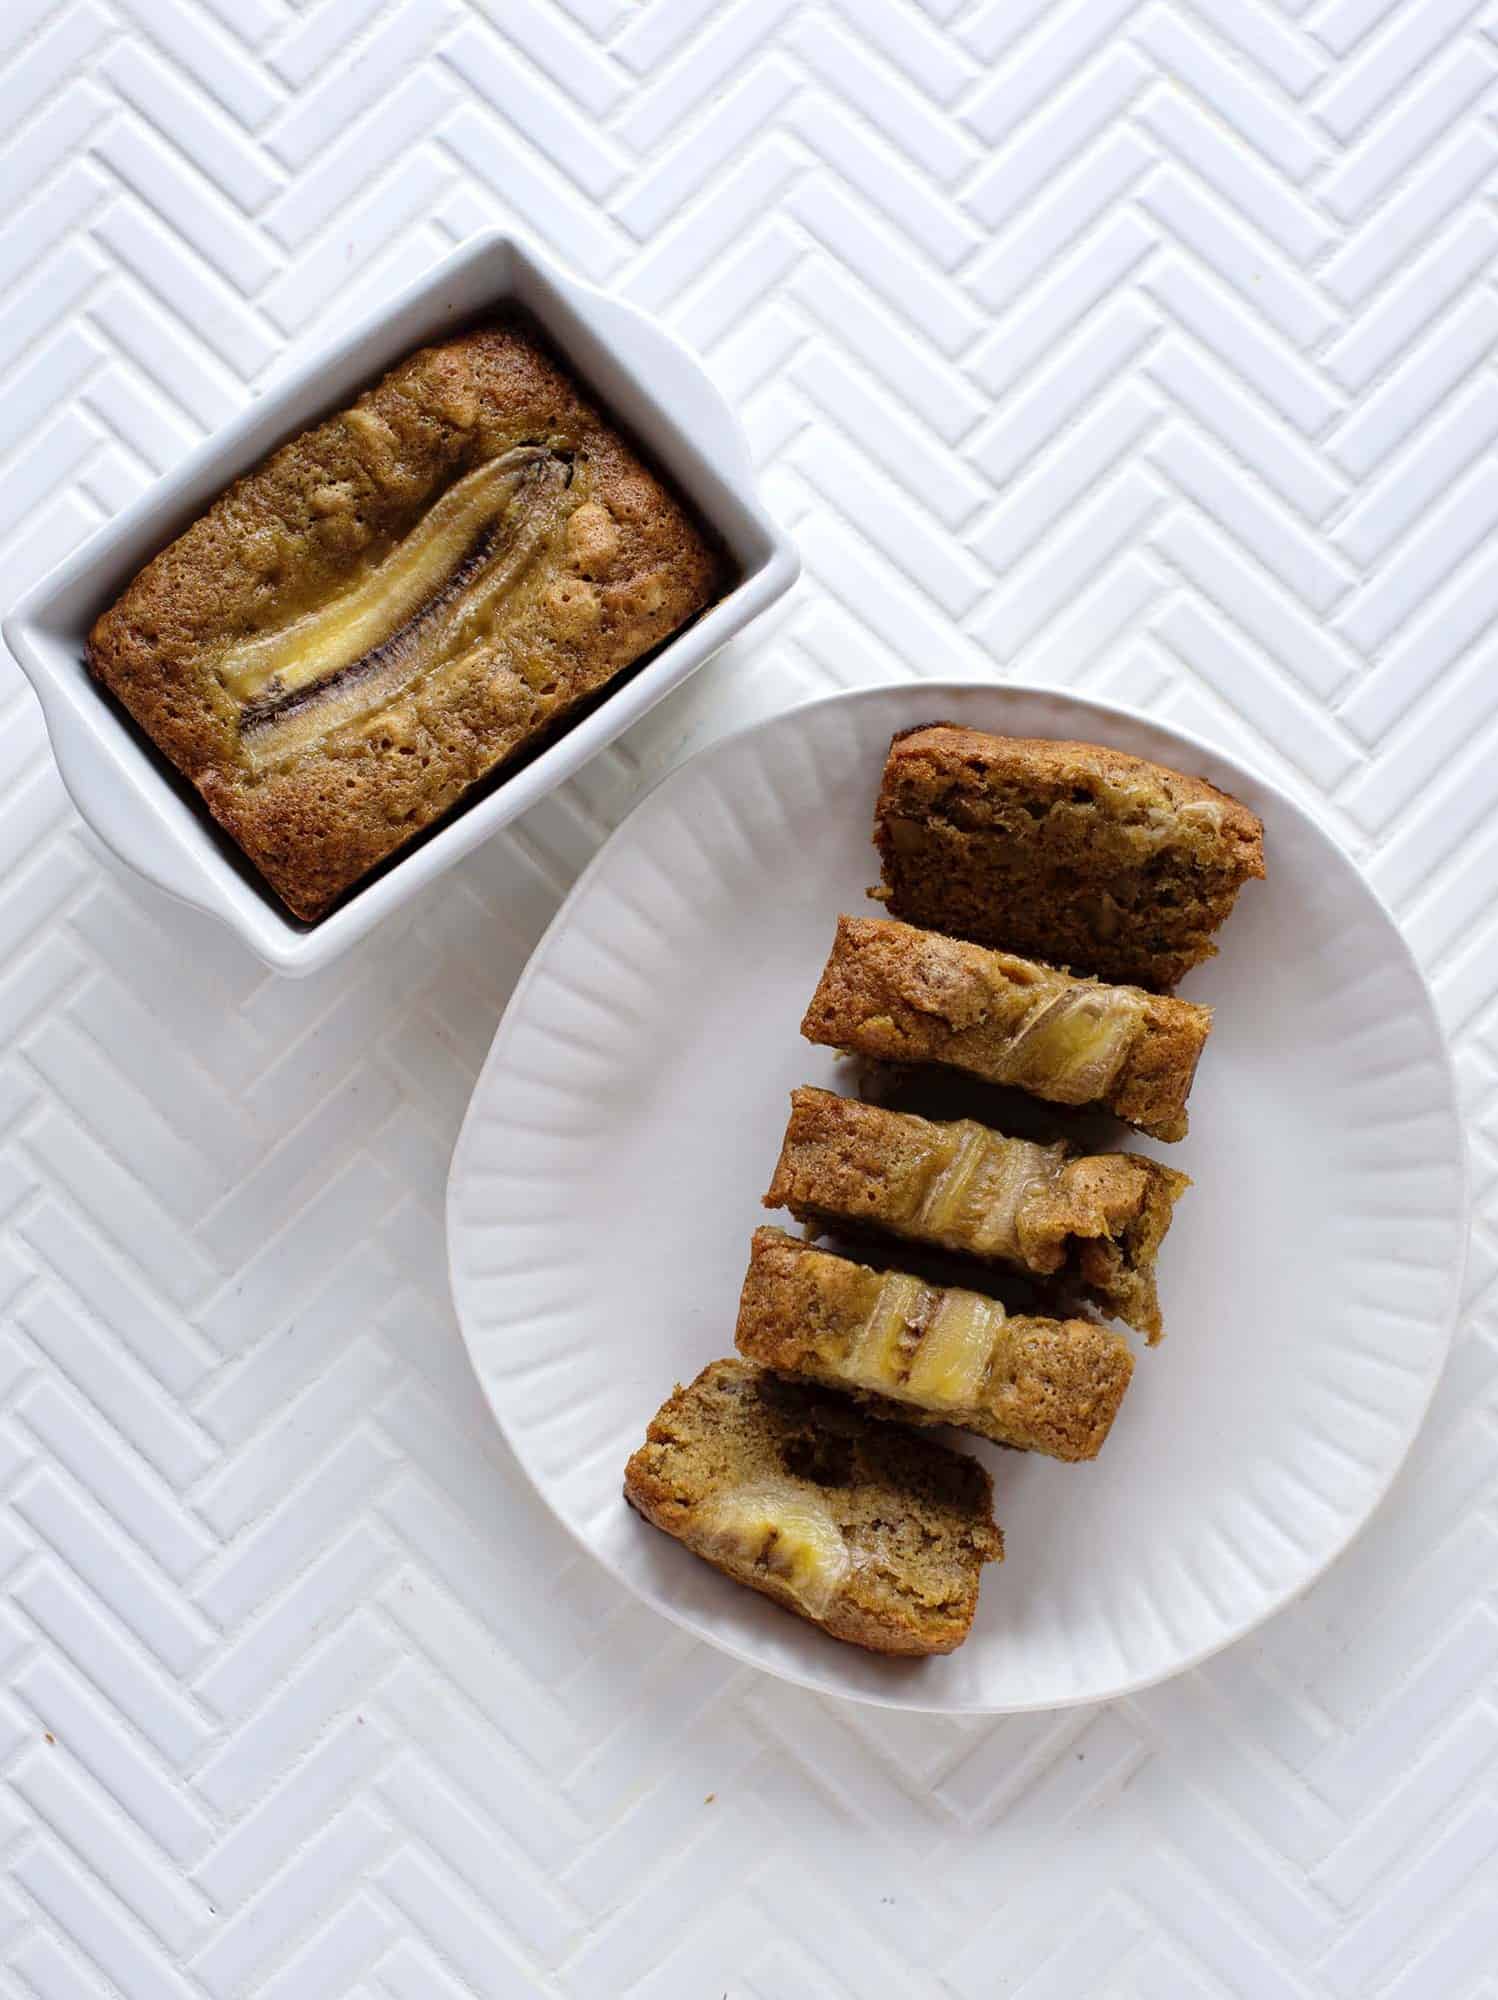 a loaf of banana bread in a dish and another loaf if banana bread cut into 5 sections on a plate